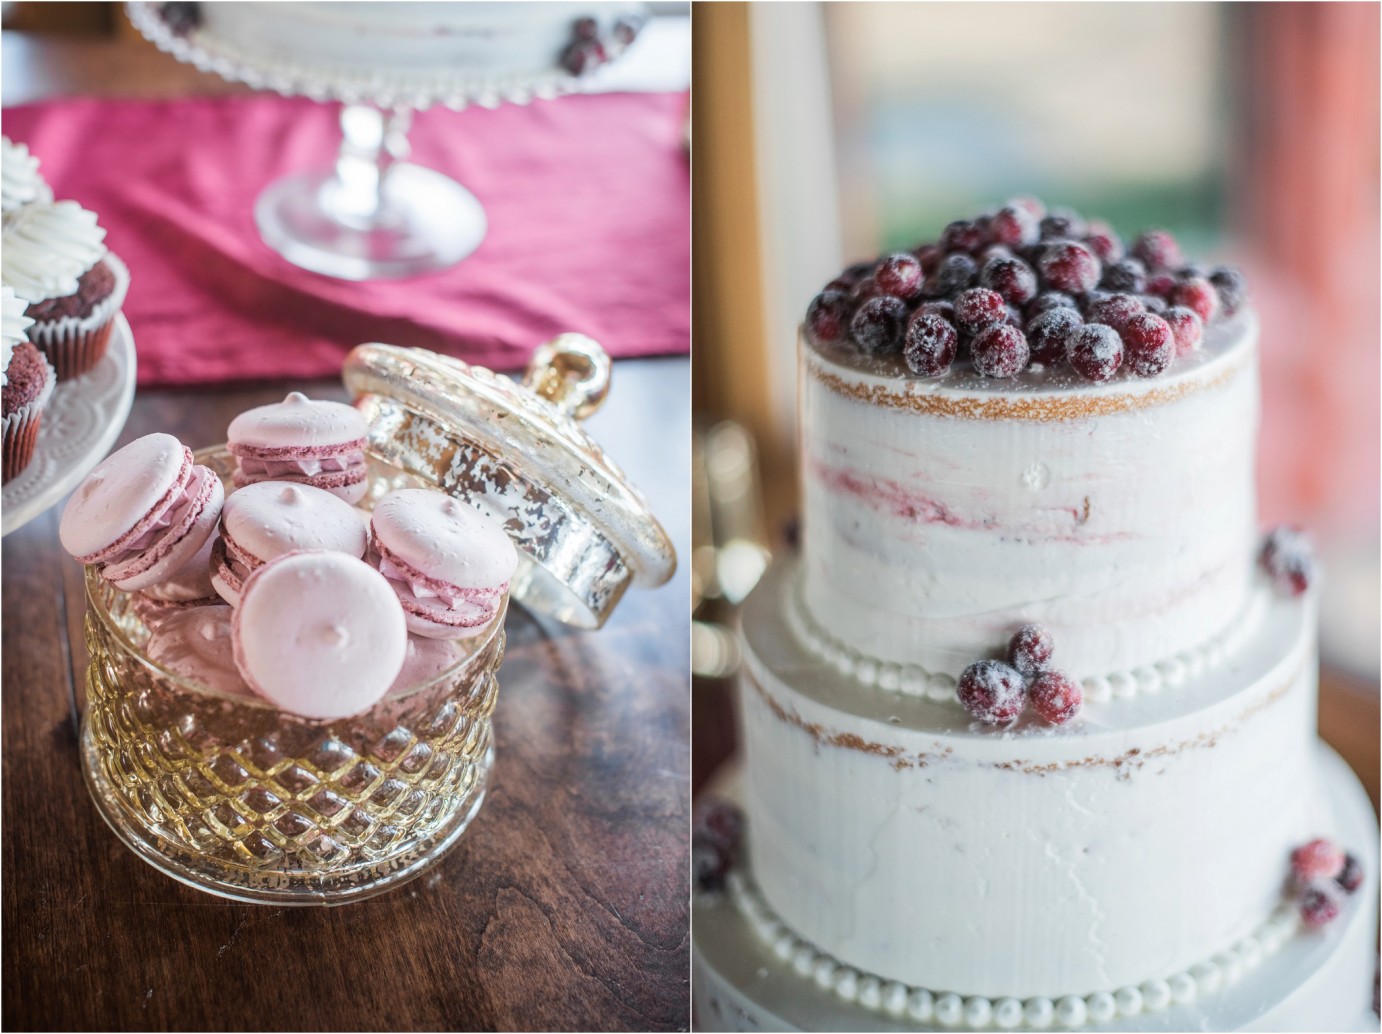 How to plan a styled shoot dessert table